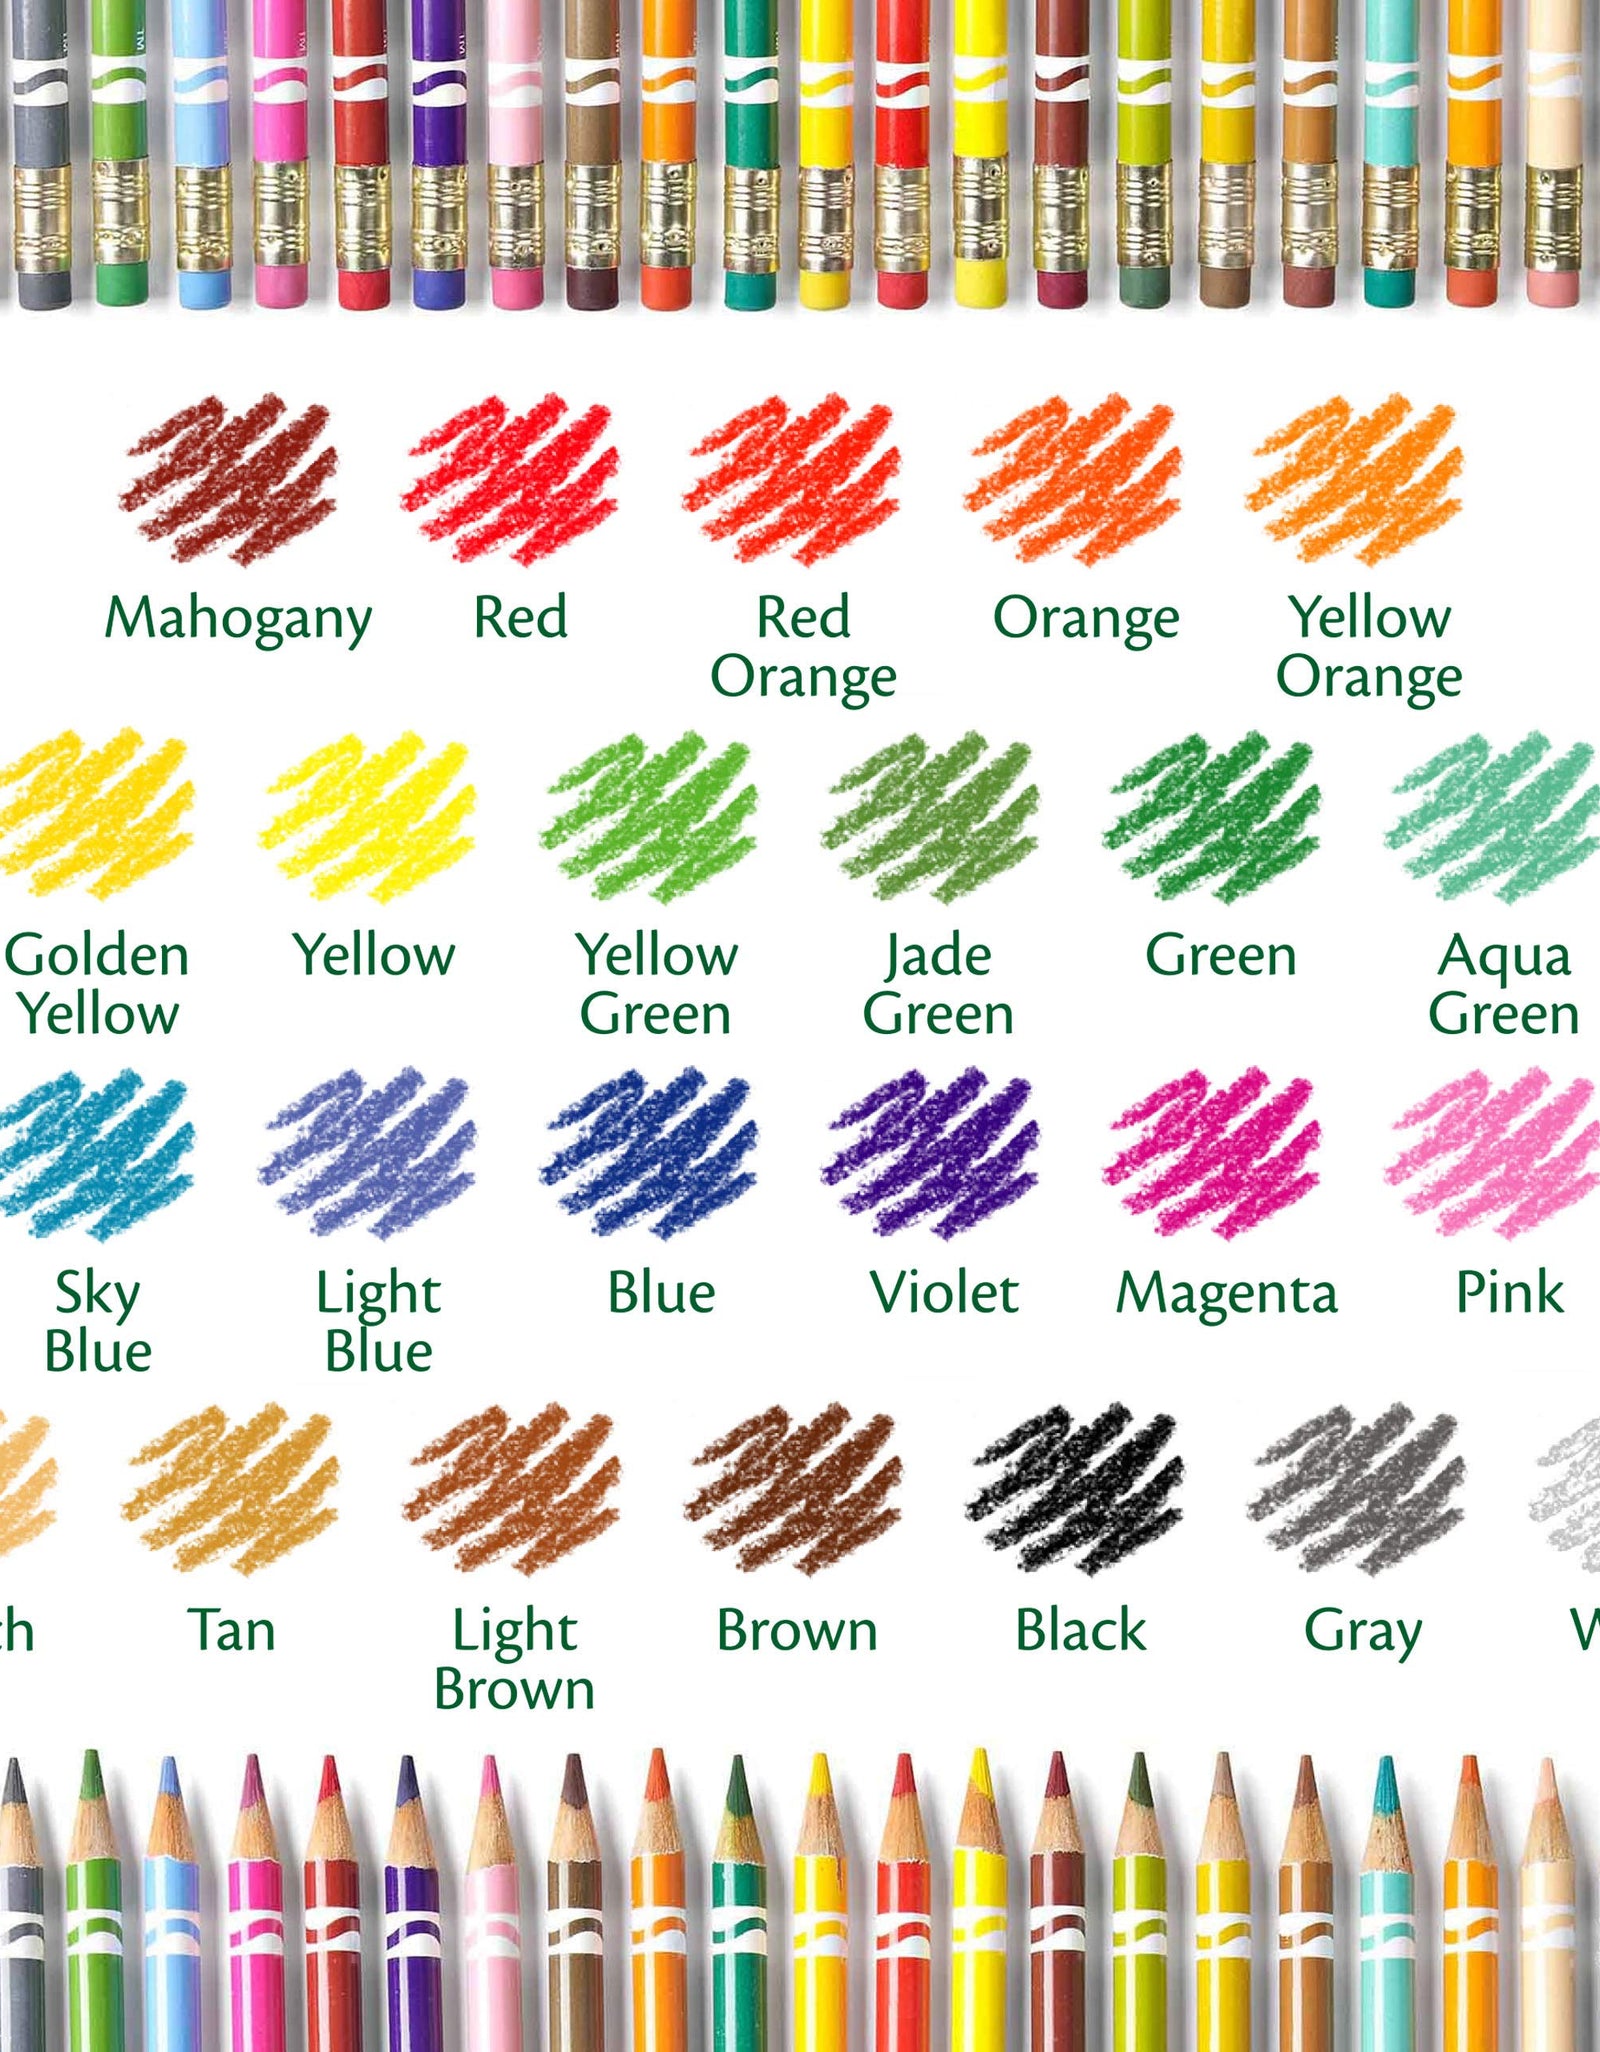 Crayola Erasable Colored Pencils, Kids At Home Activities, 24 Count, Assorted., Long